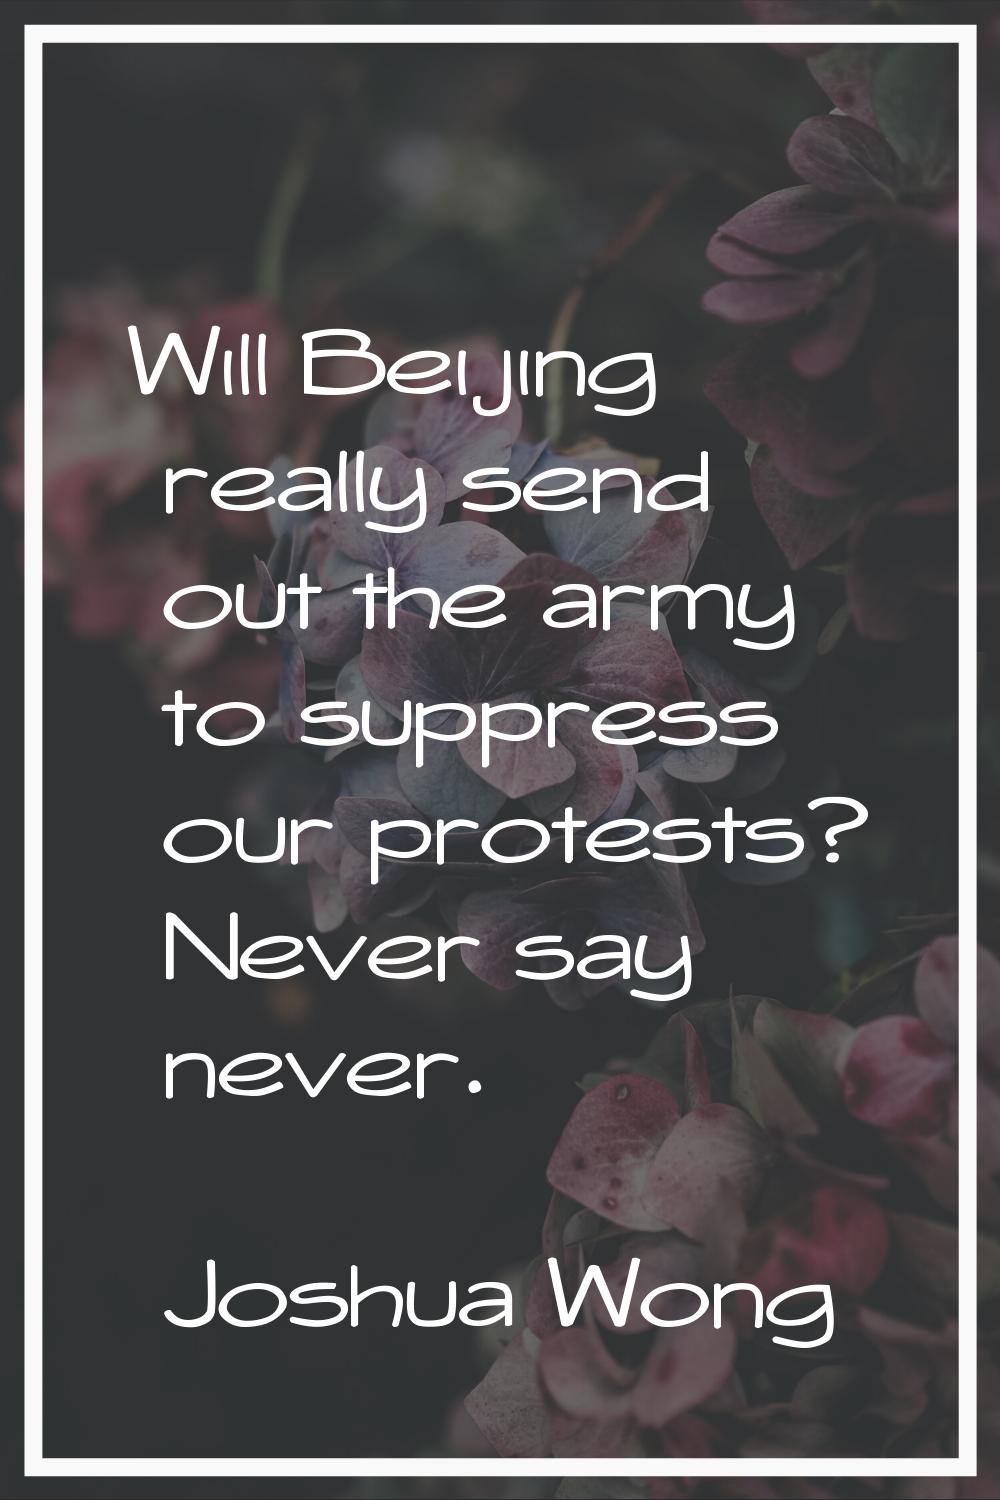 Will Beijing really send out the army to suppress our protests? Never say never.